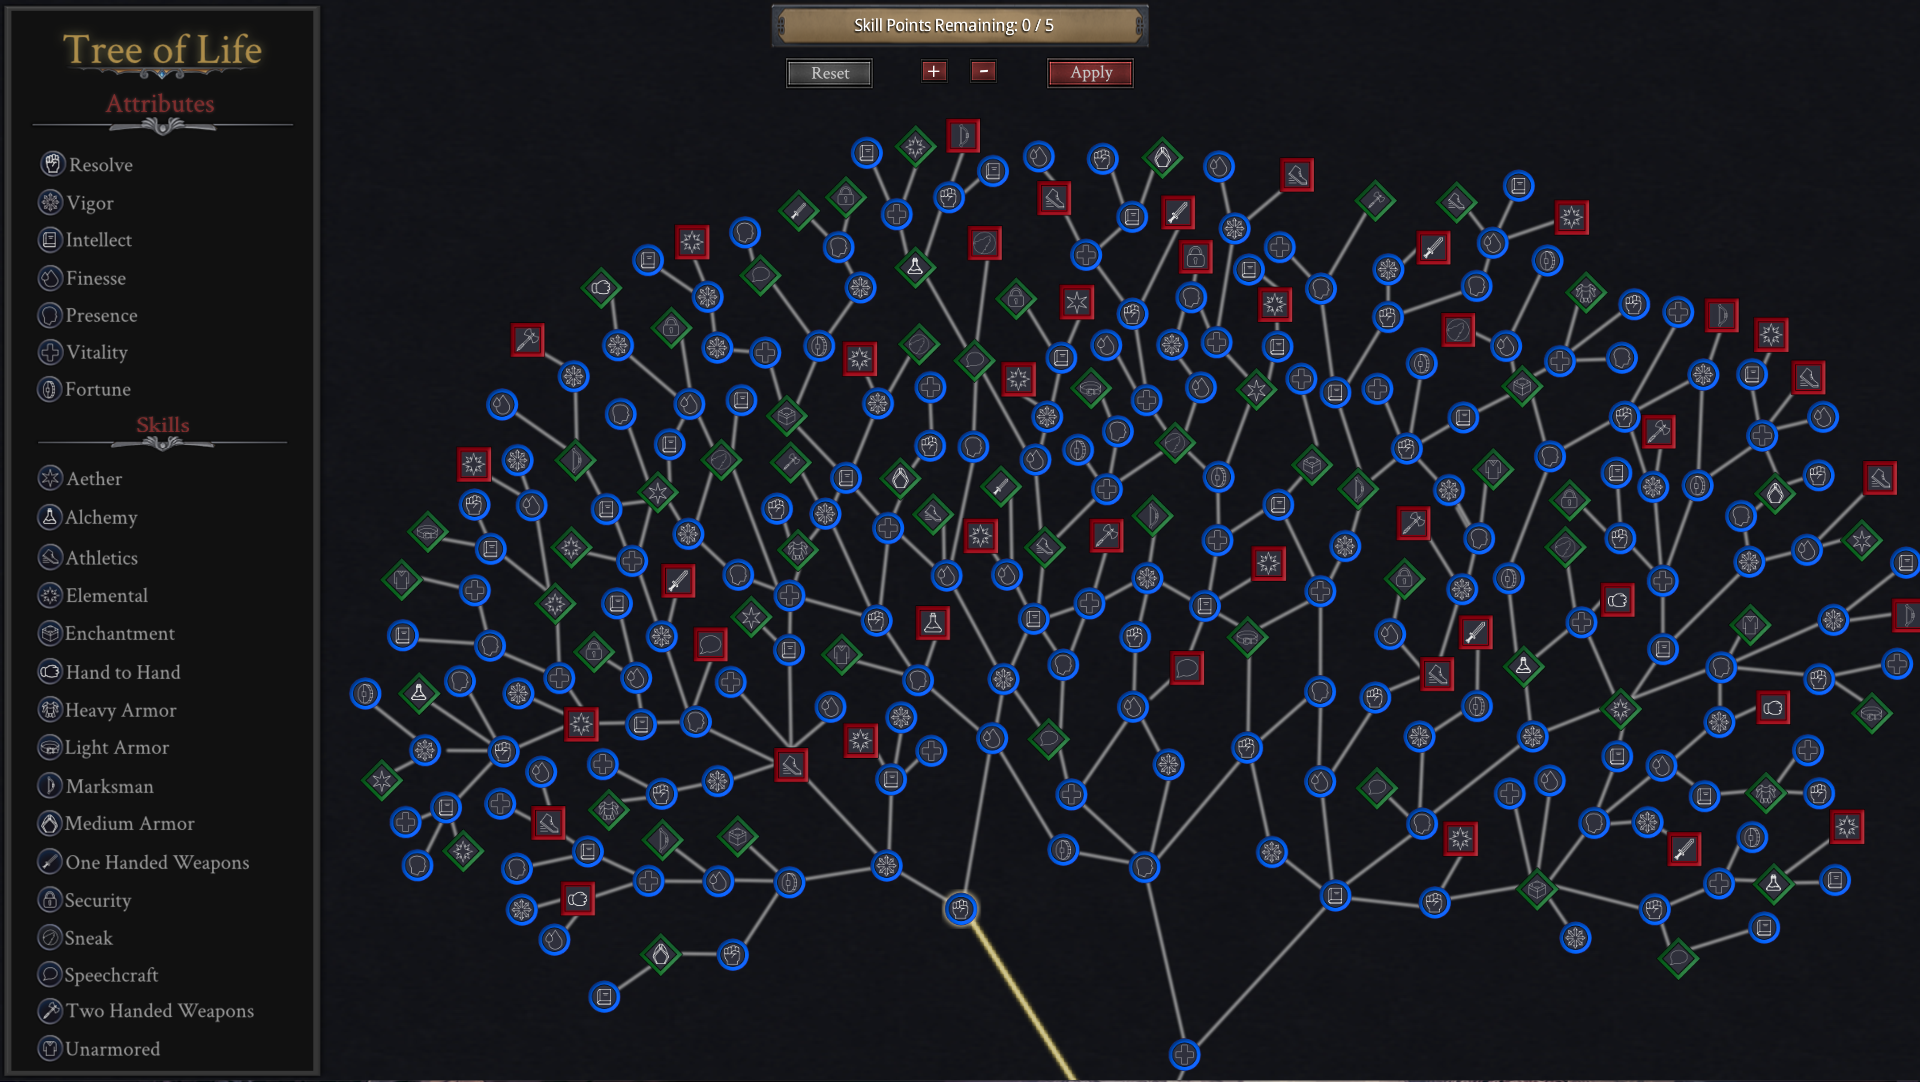 A screenshot of the skill tree in game